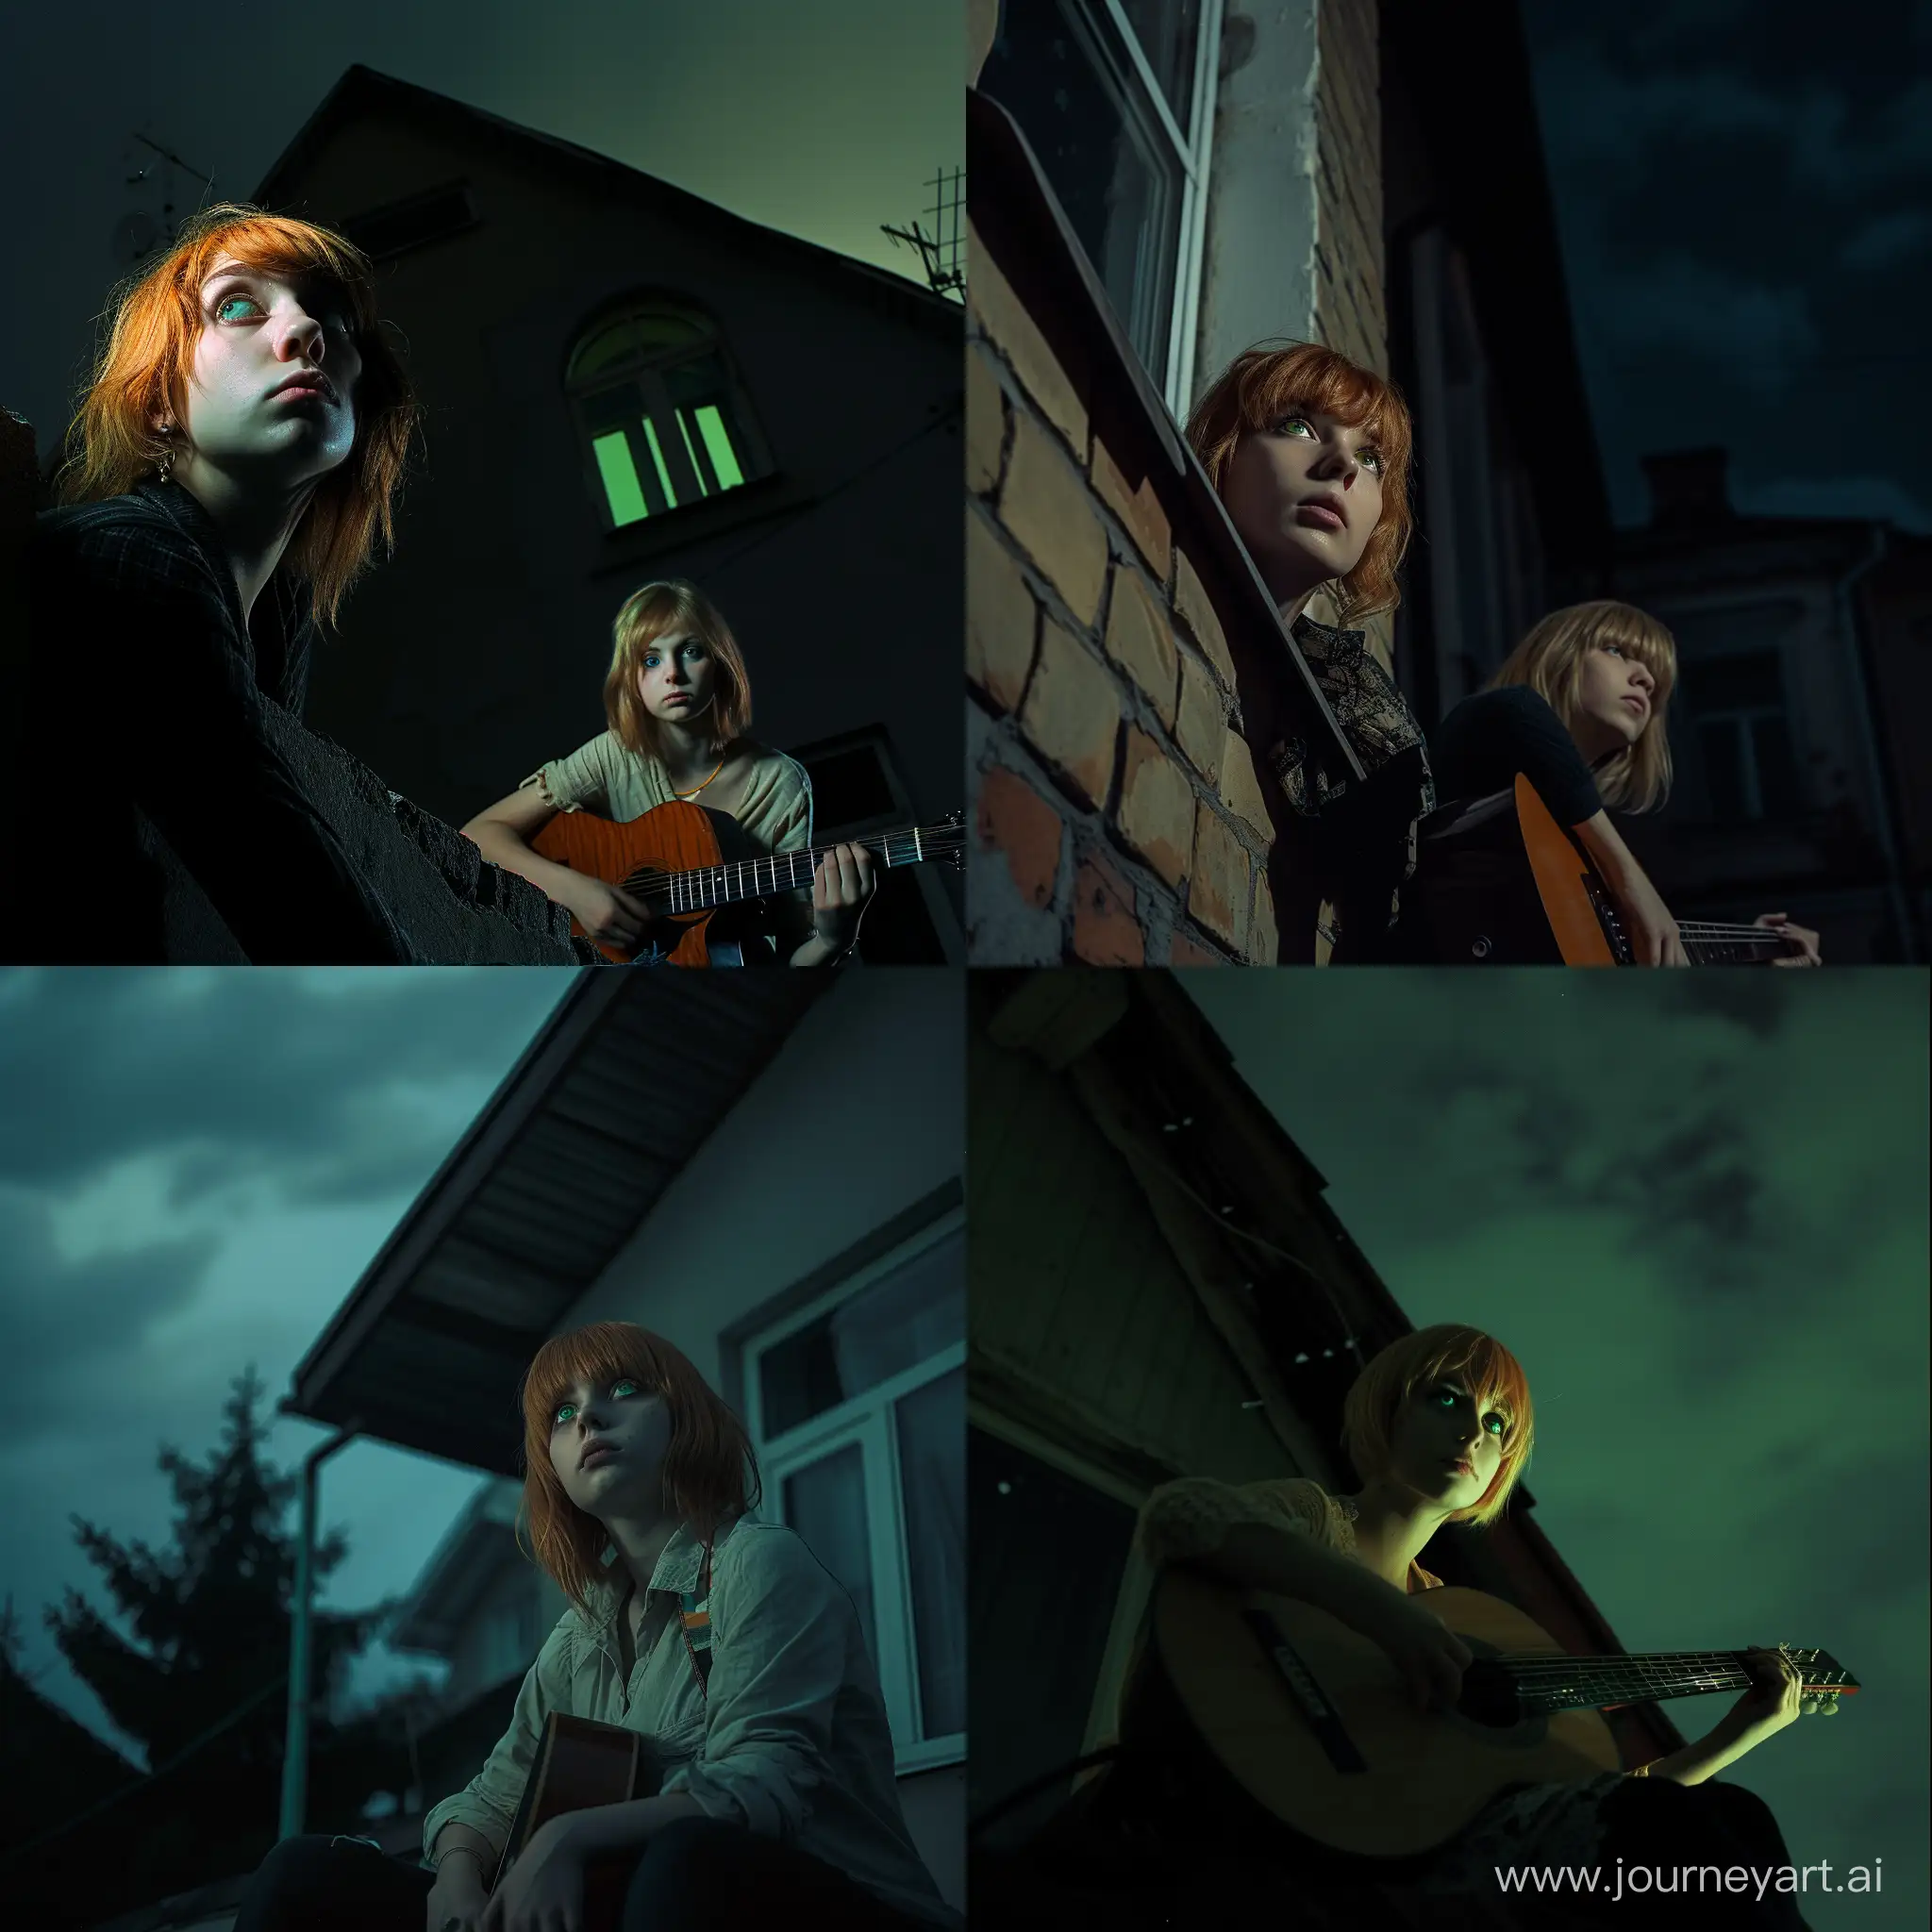 redhead guy, slavic, starring from the high roof of the building into the sky, night, taken on Pentax K1000, 50mm portrait lens, dark mood, beige-haired girl slavic with green eyes sitting near with acoustic guitar with derealistion